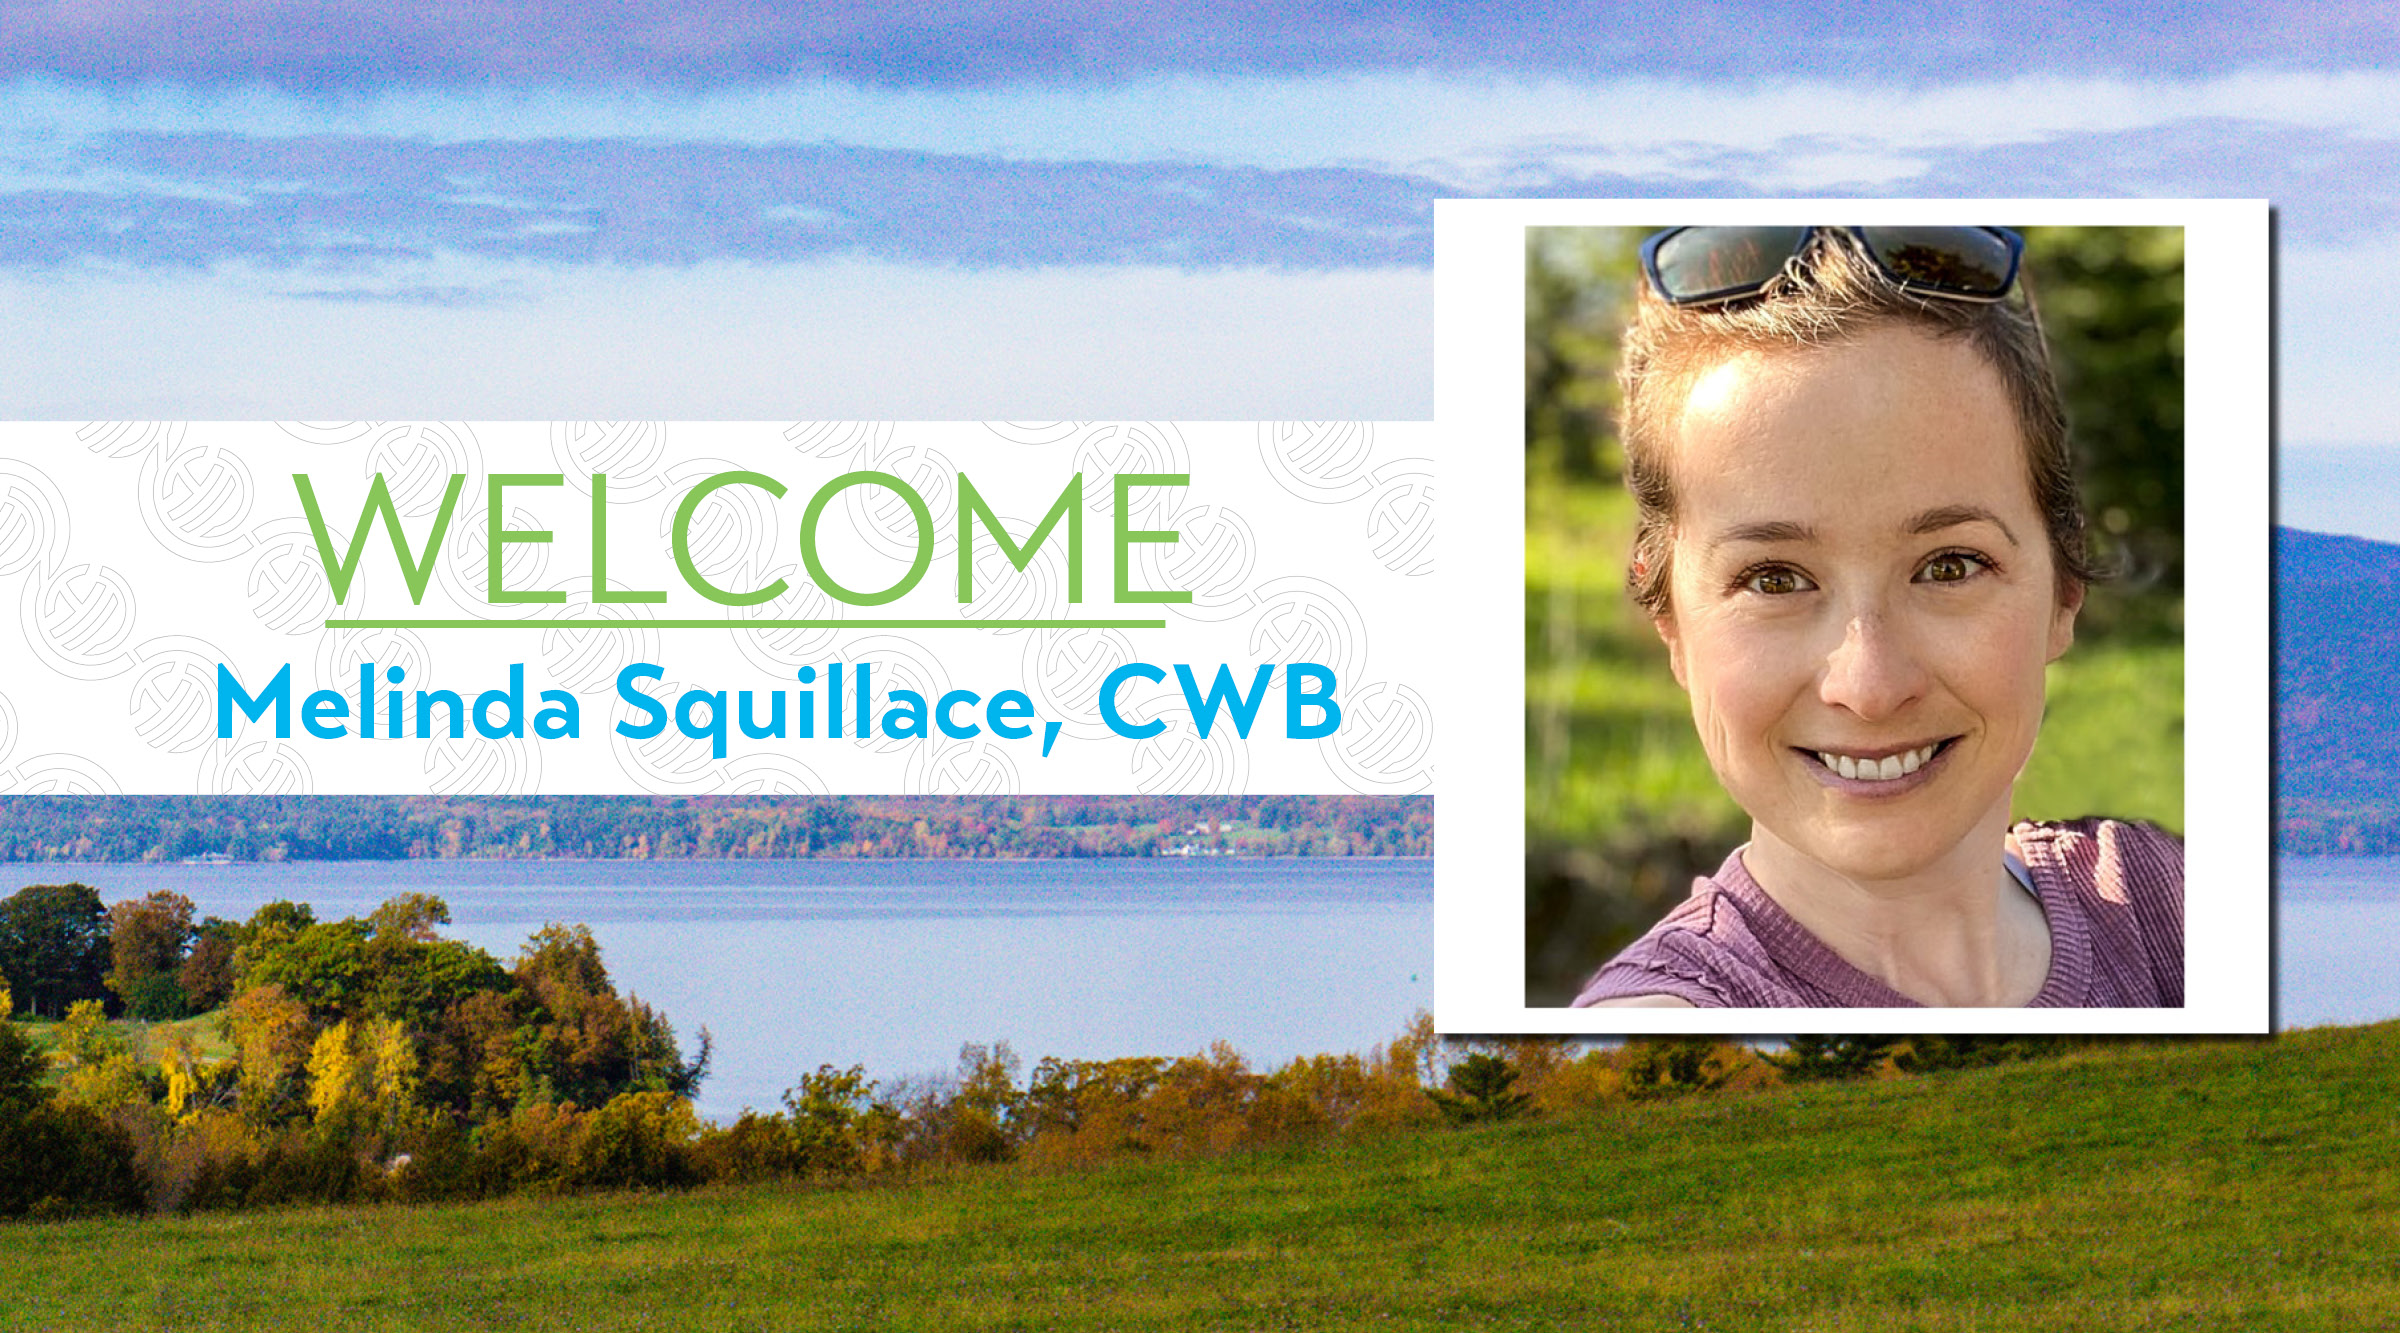 Melinda Squillace hiring announcement featuring her headshot next to "Welcome Melinda Squillace" and an image of the Adirondack Mountains in the back